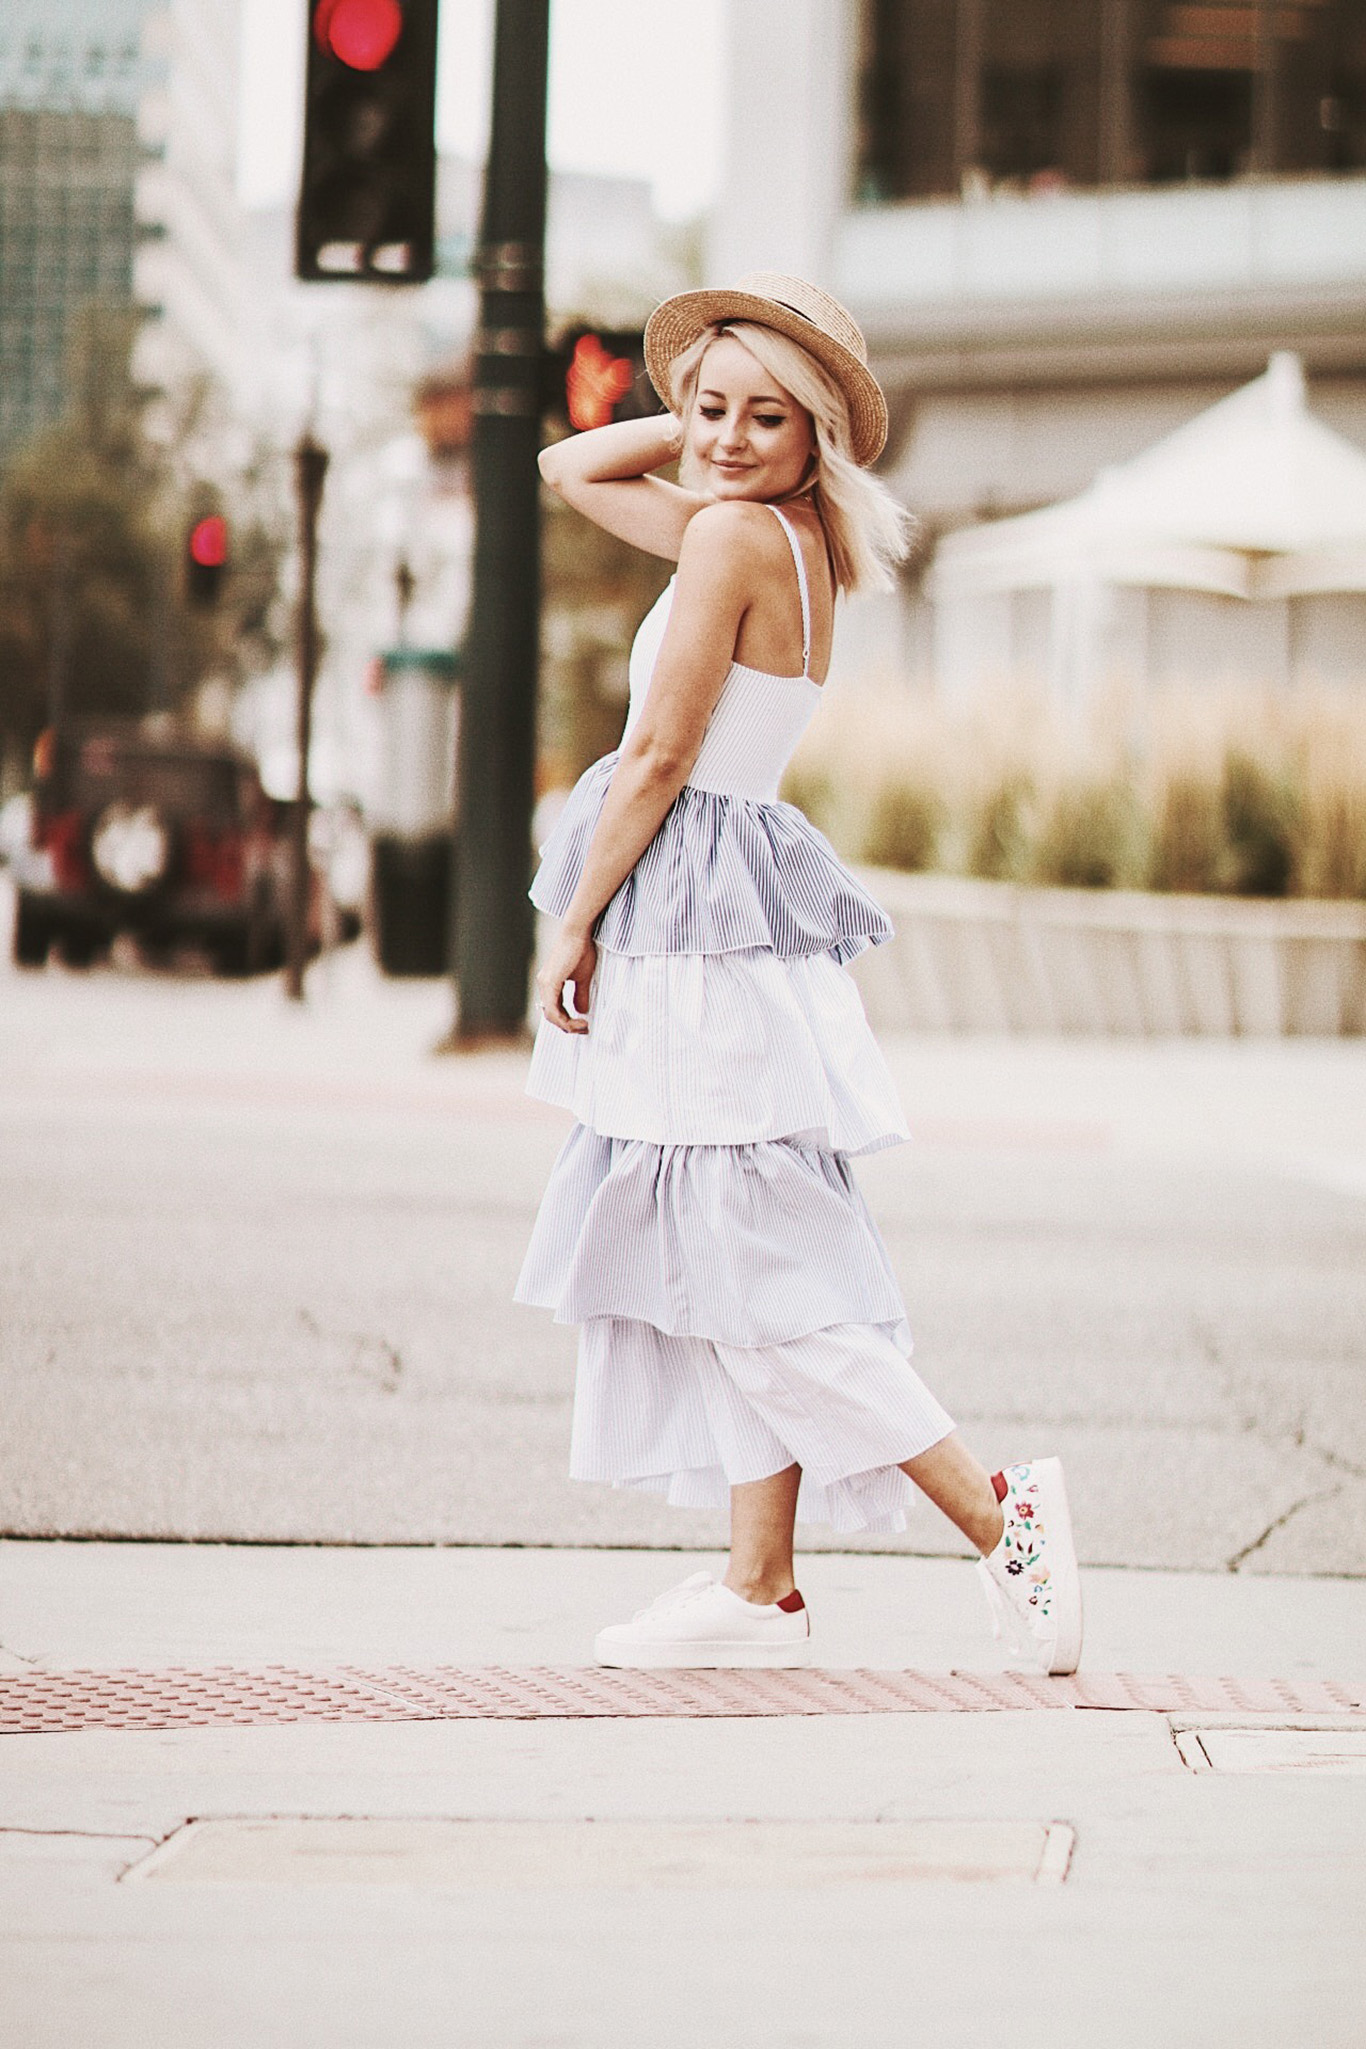 Alena Gidenko of modaprints.com styles a ruffle maxi dress from sheen and shares how to style it with tennis shoes